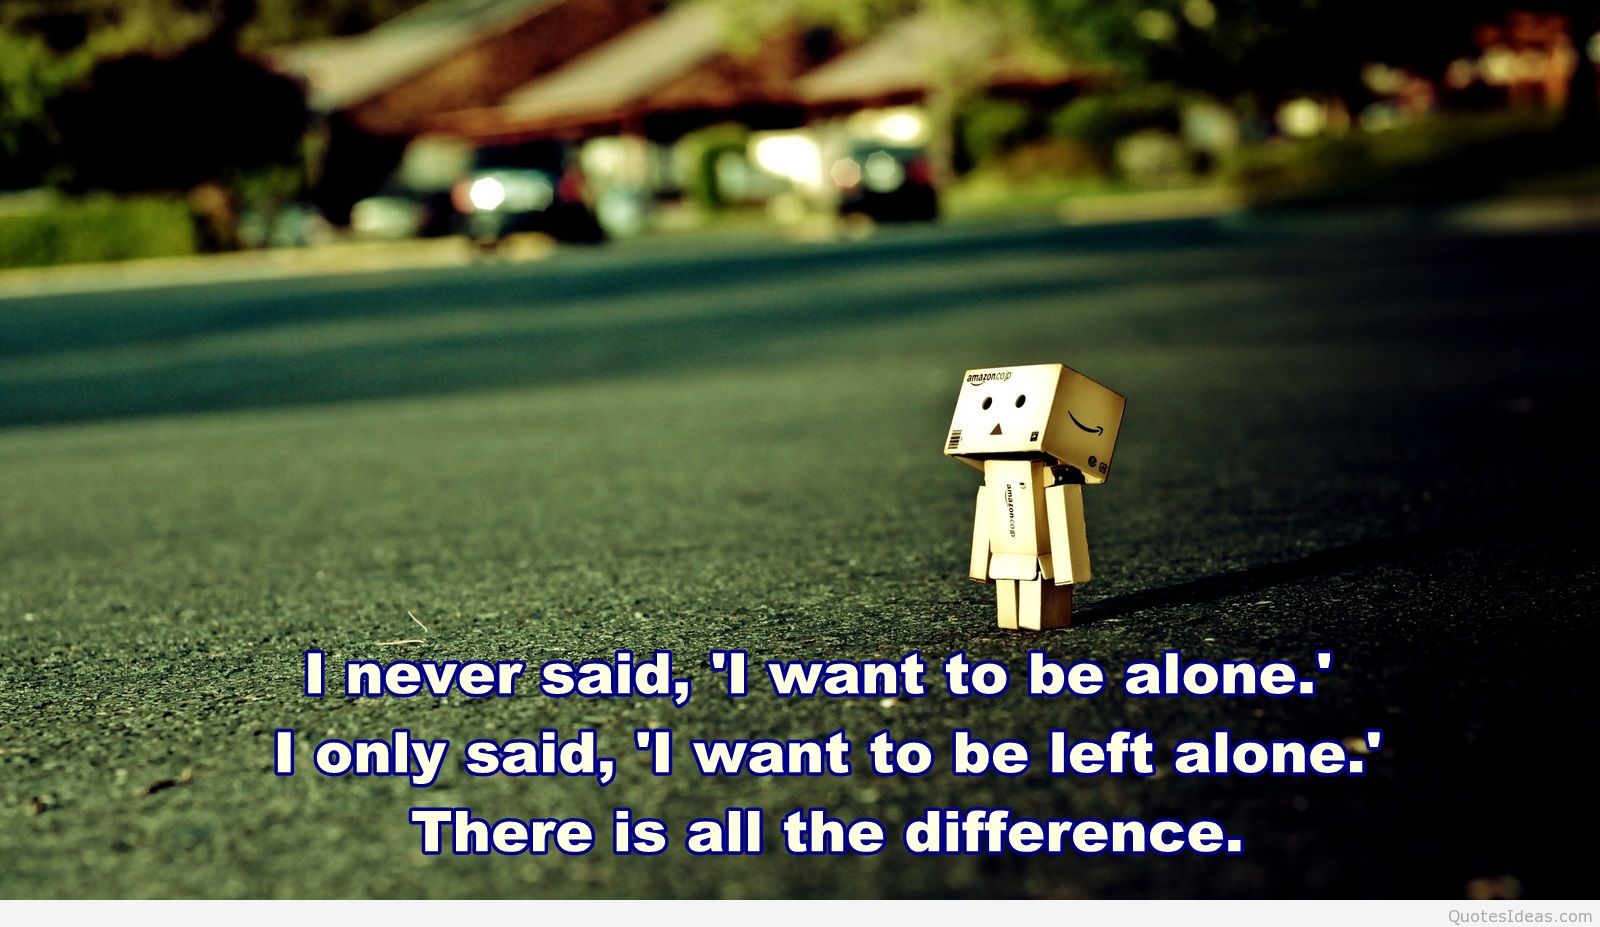 alone wallpaper with quotes,text,font,photo caption,adaptation,road